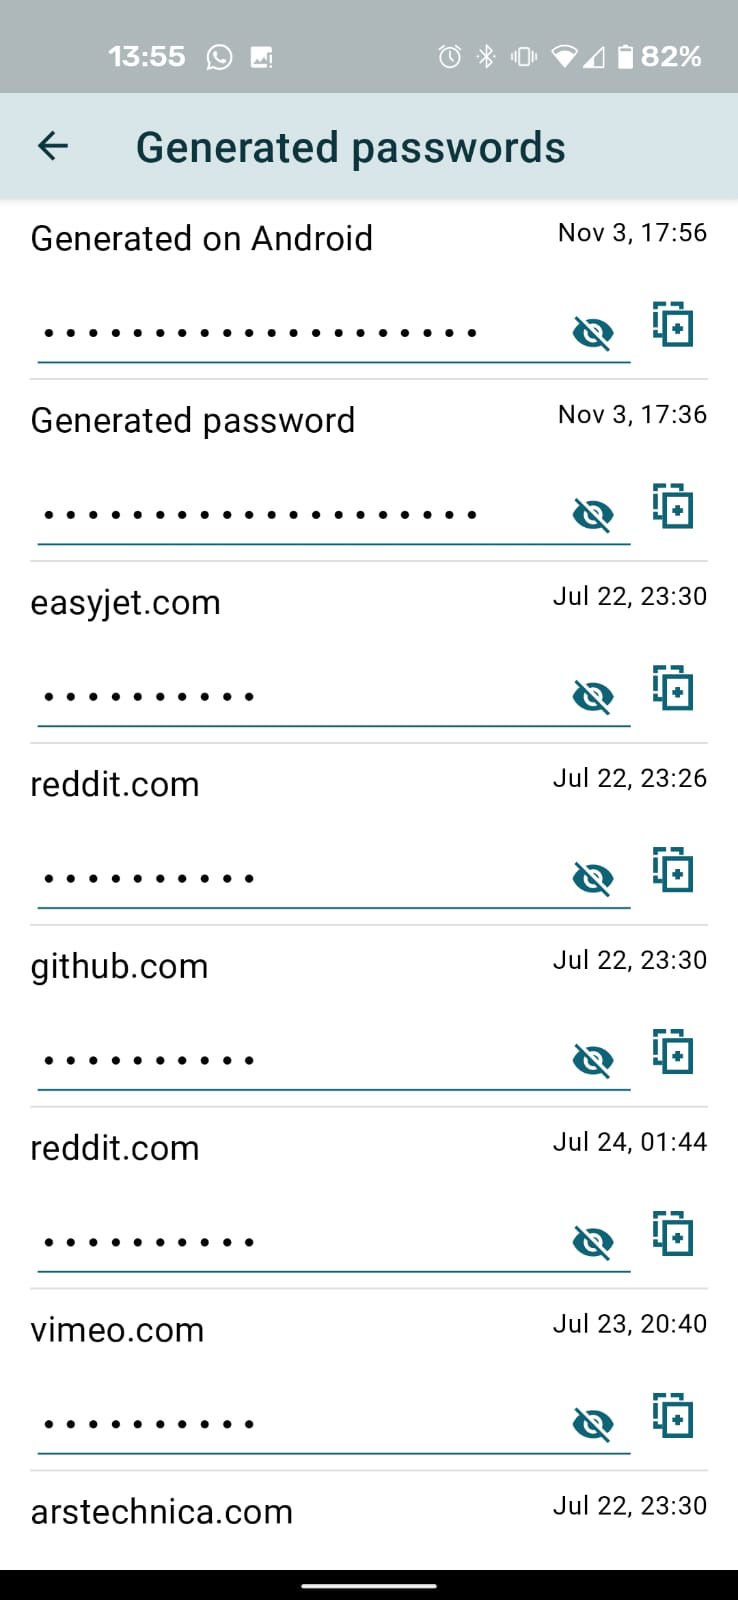 android password history image.png